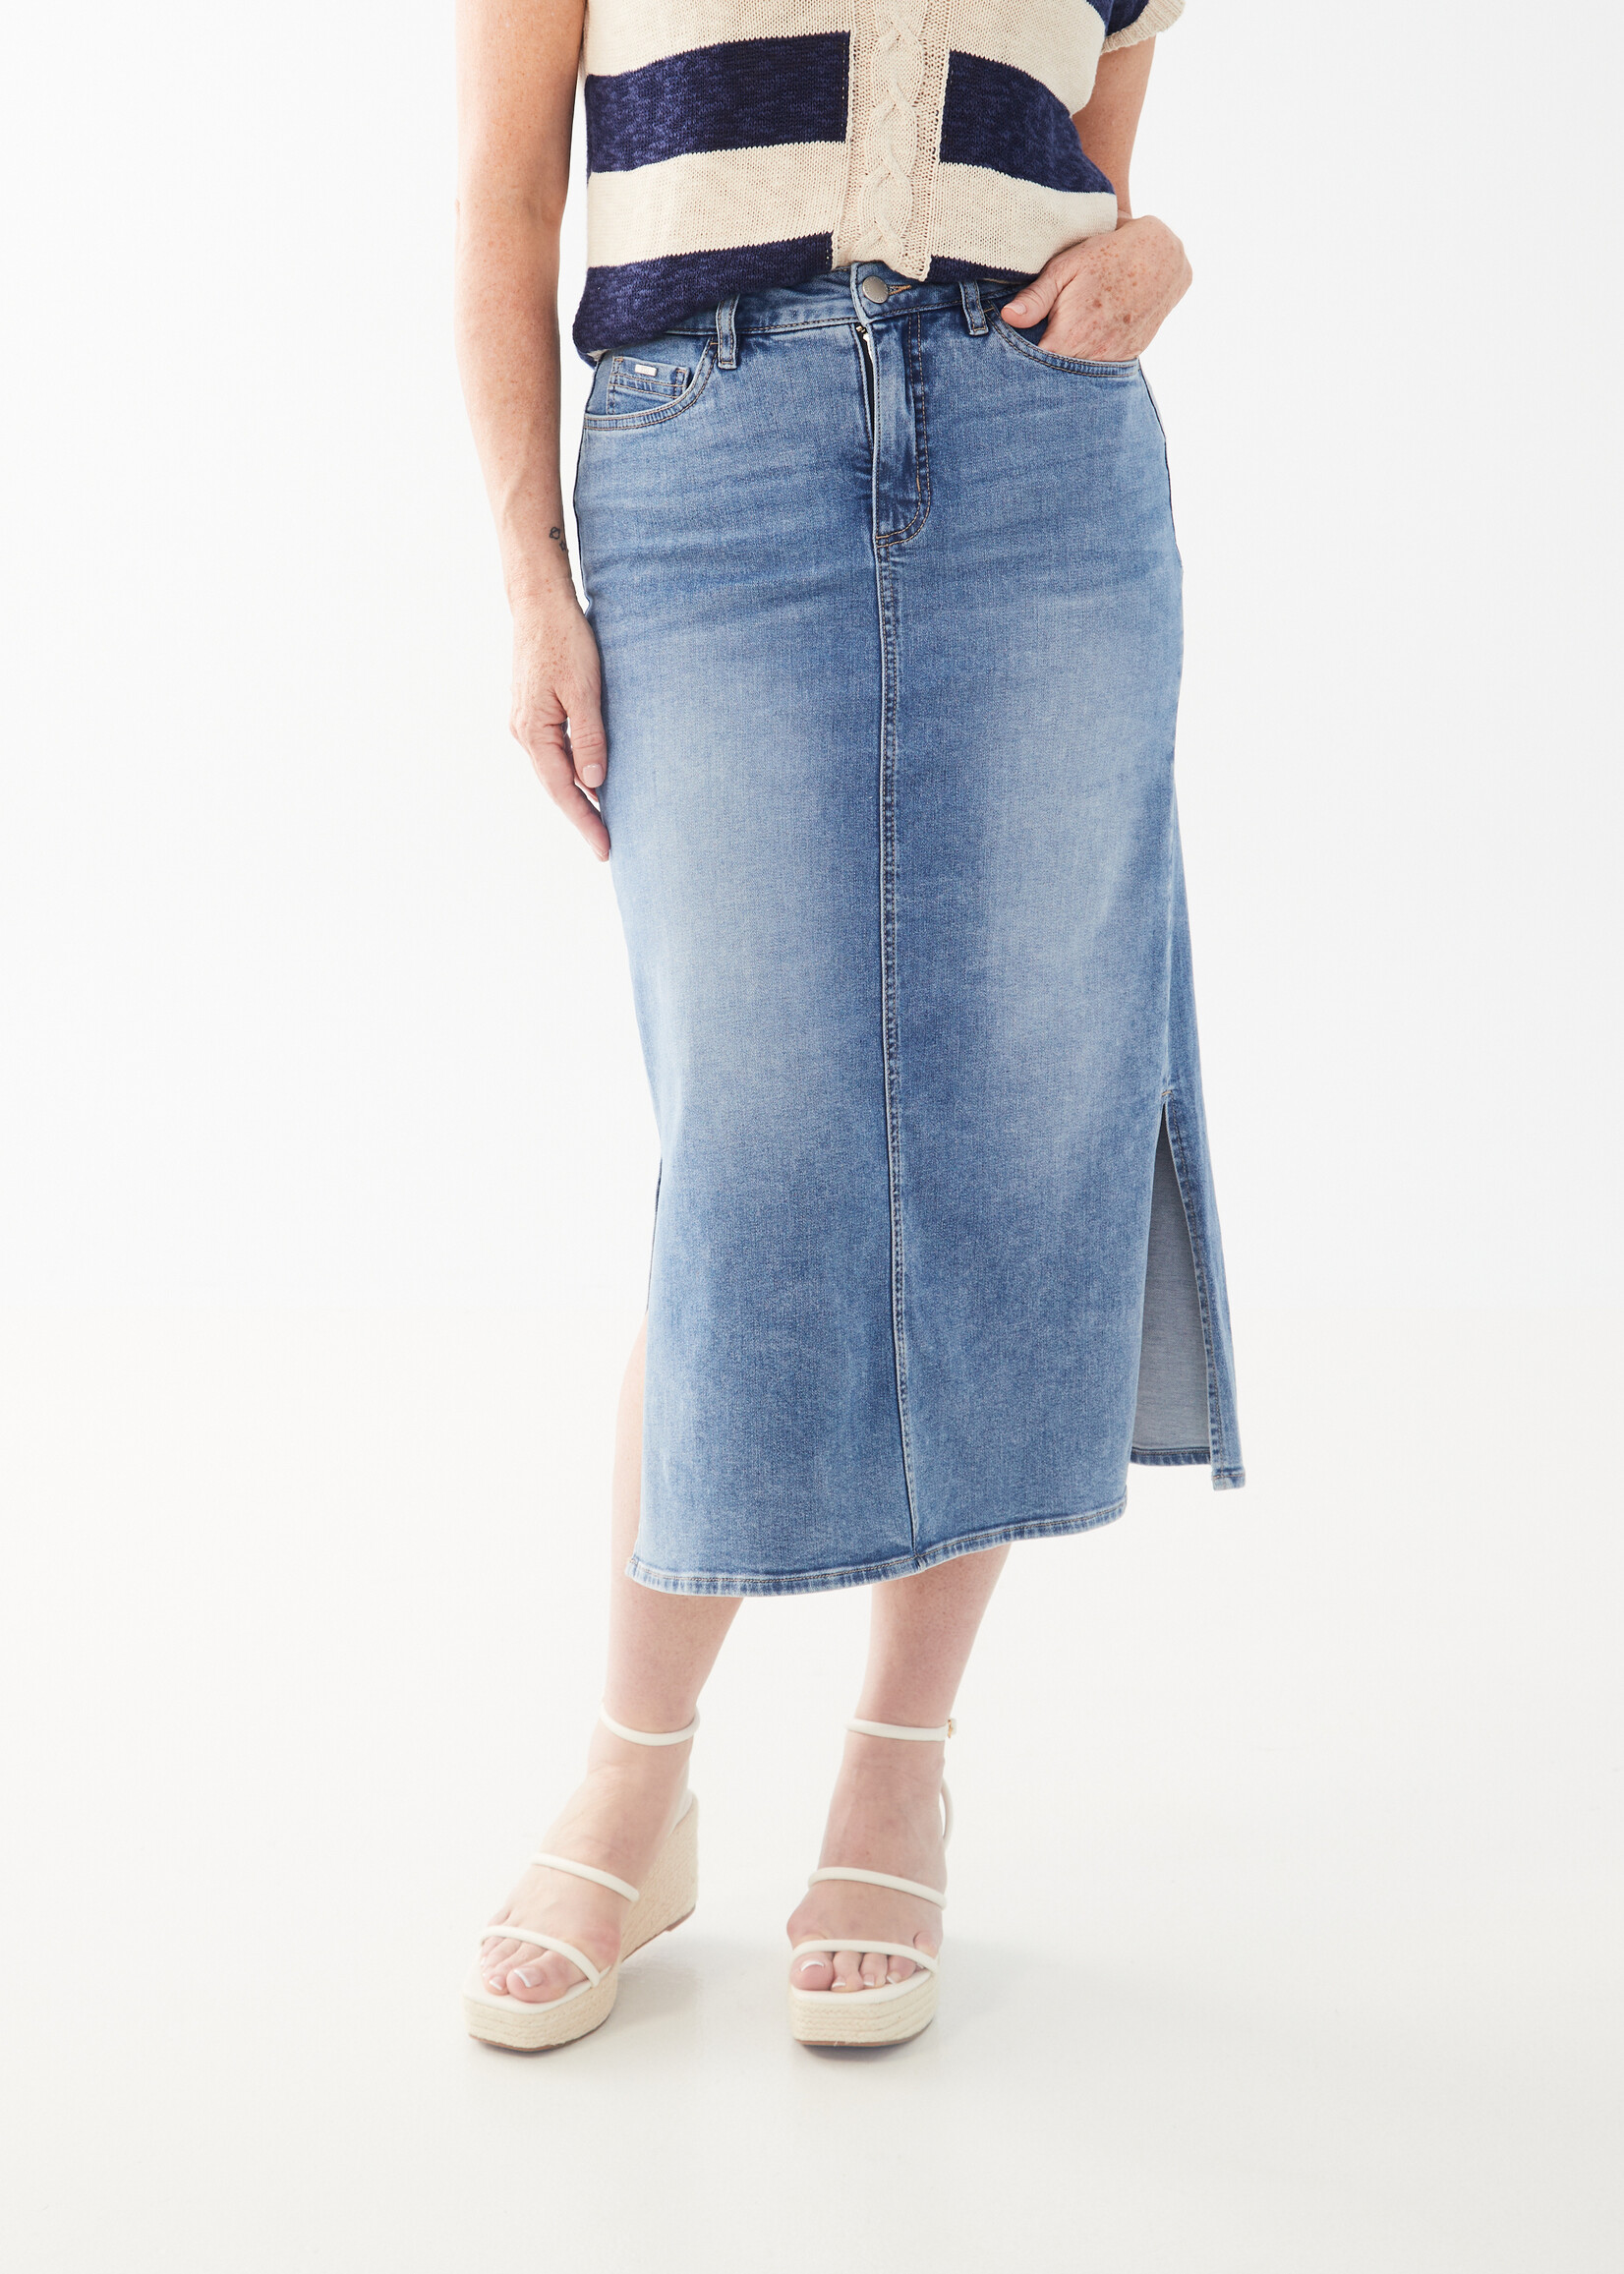 French Dressing Jeans FDJ Jean Skirt with Slit